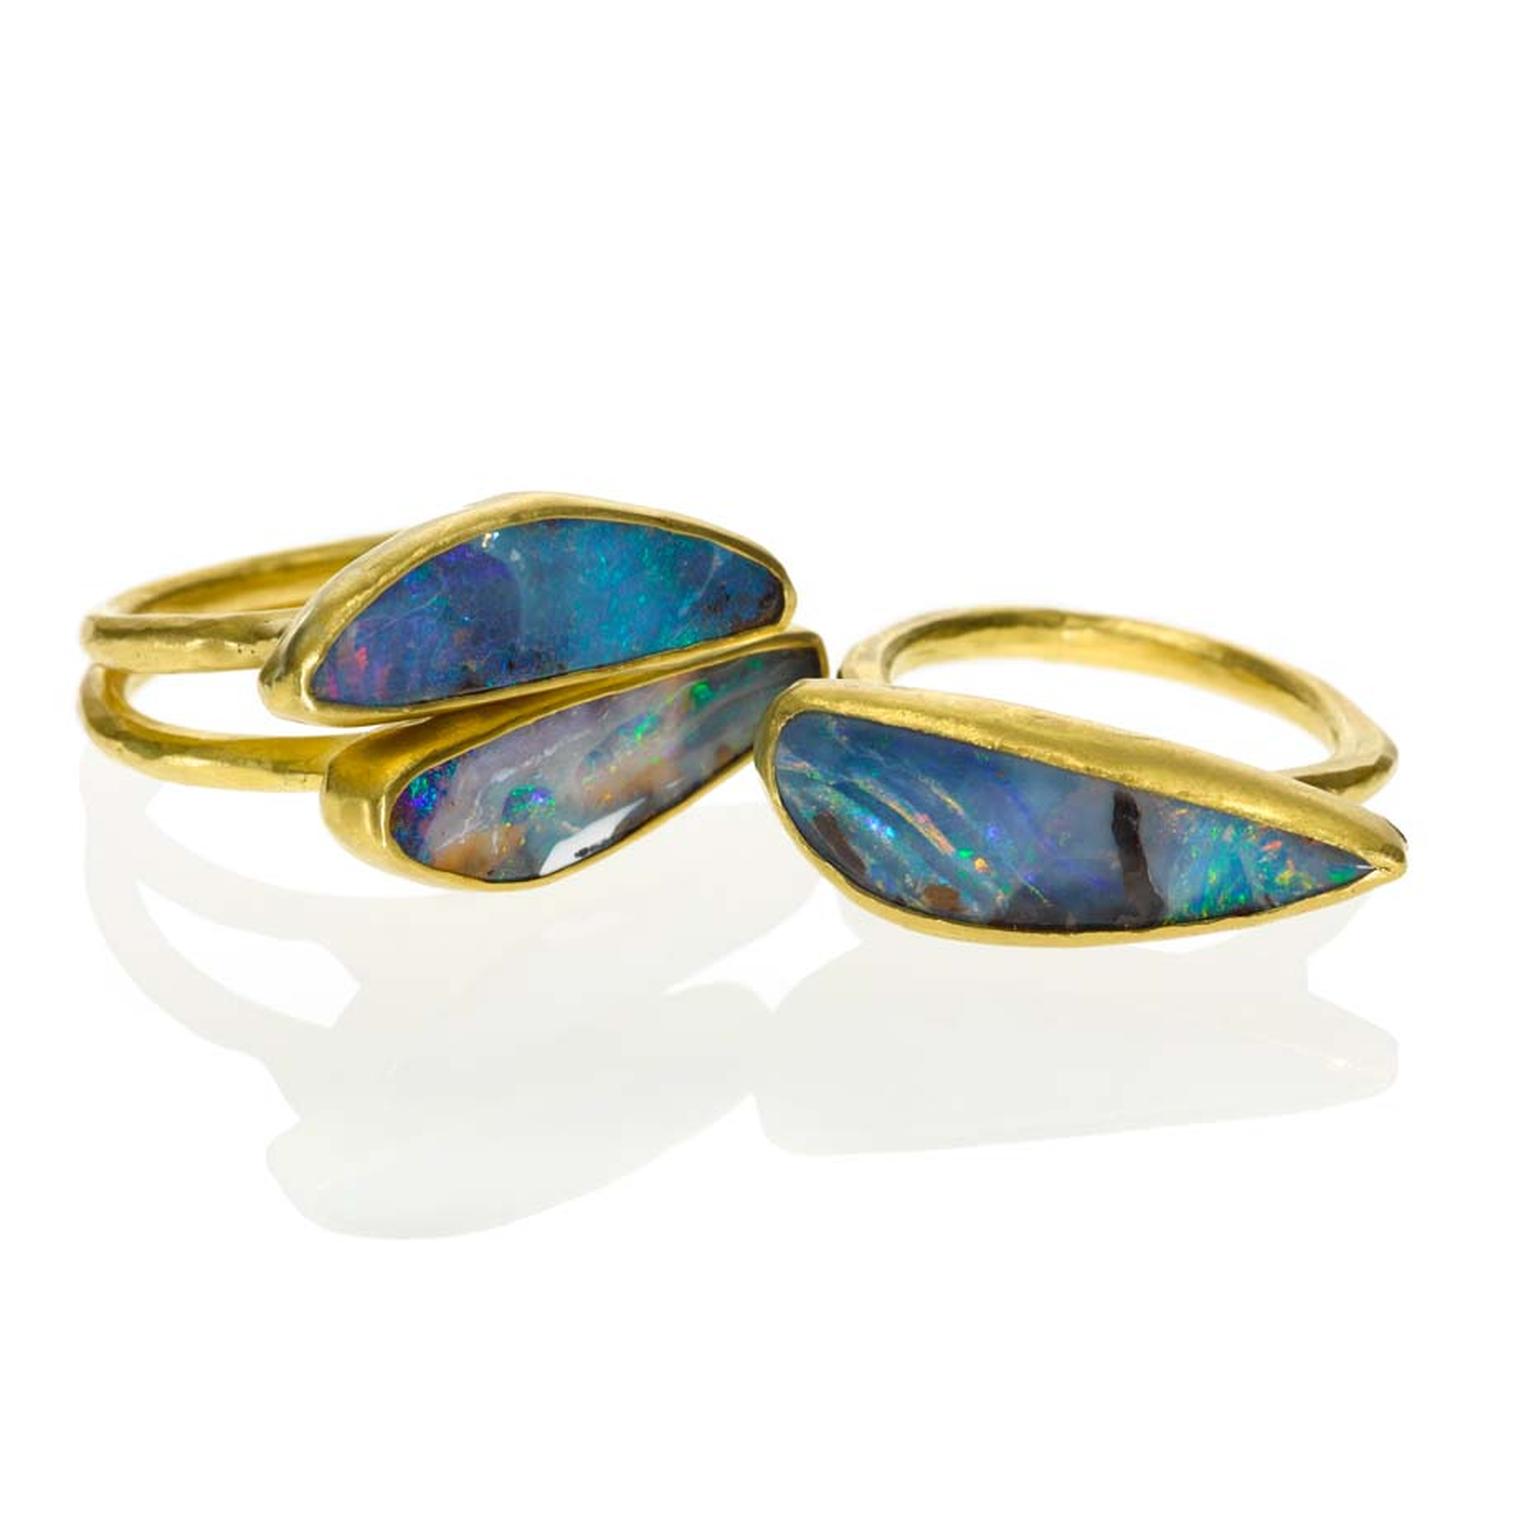 Margery Hirschey stackable opal and gold rings.